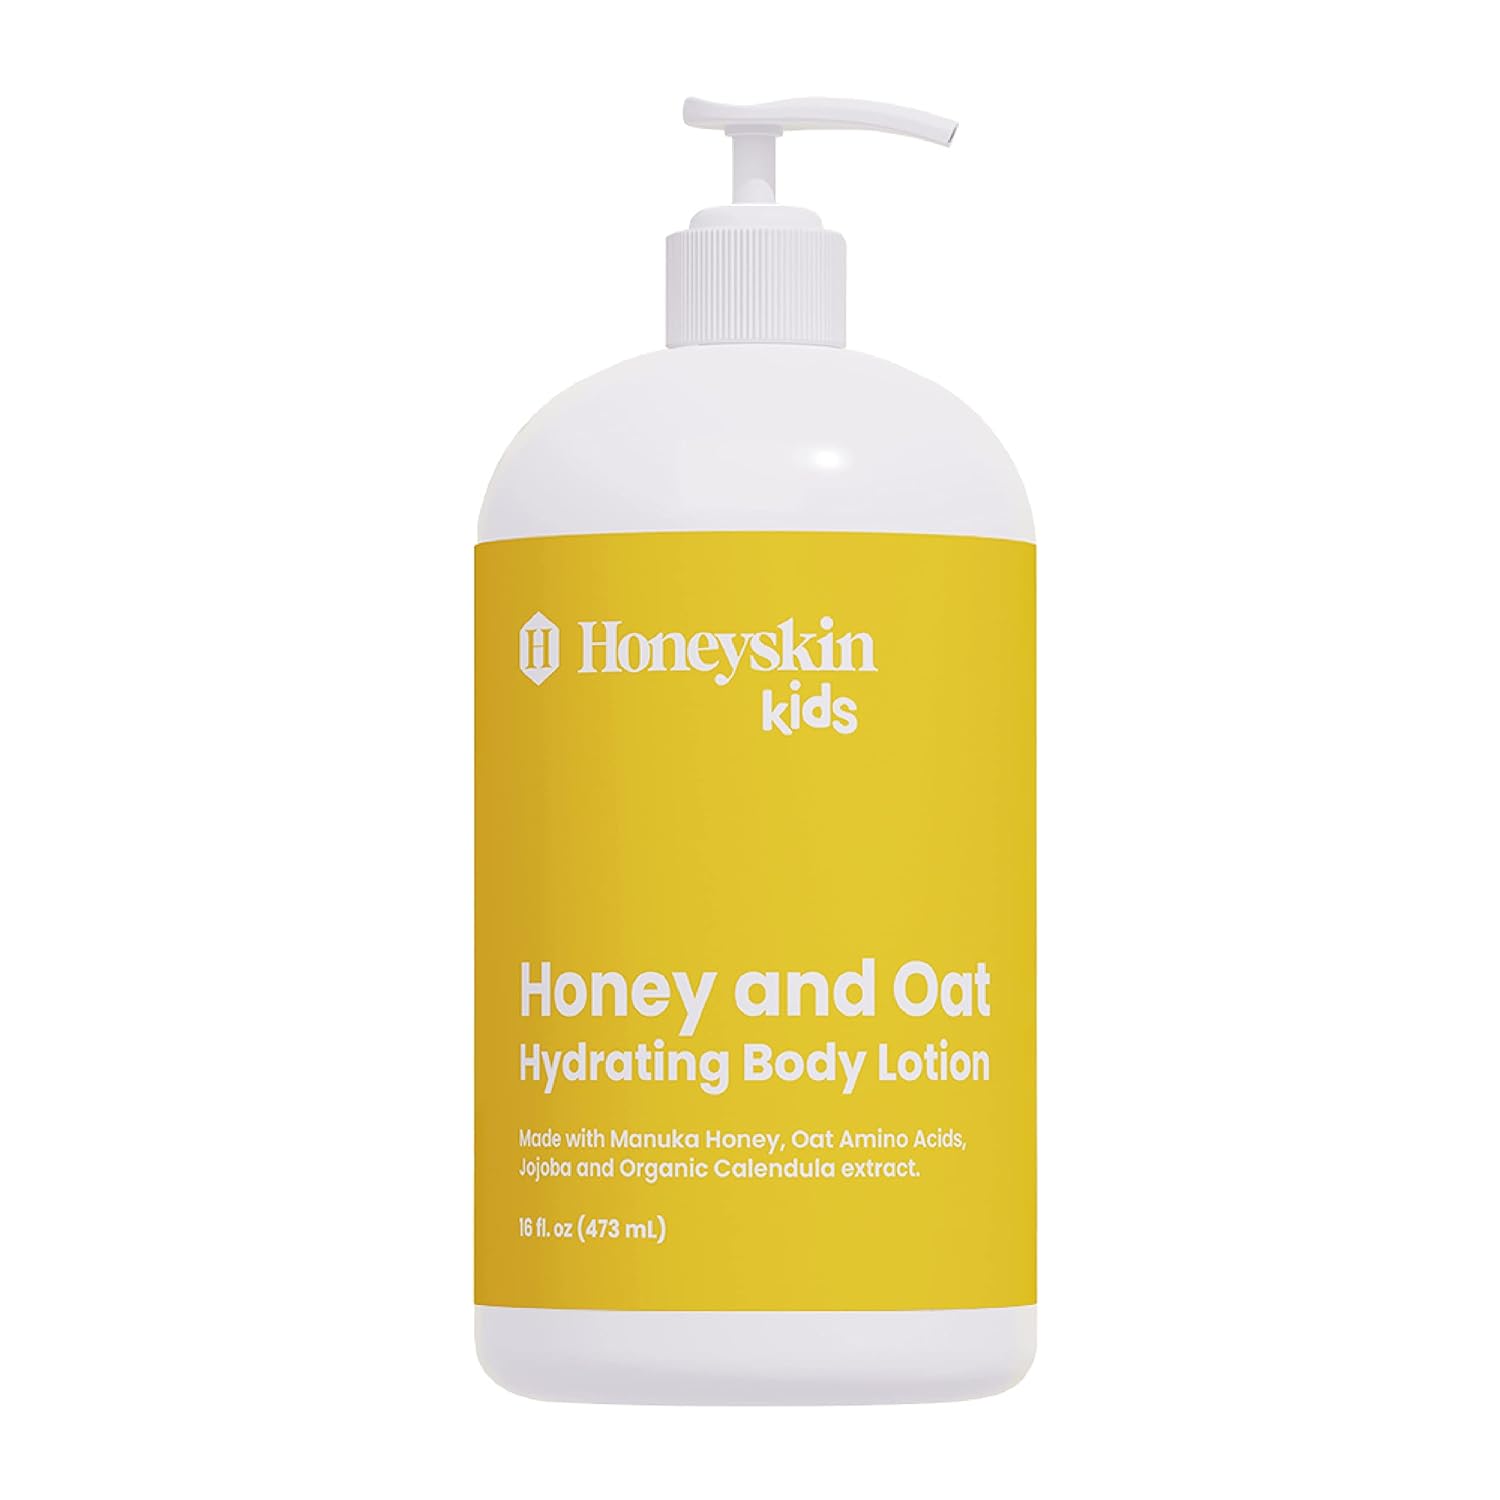 Kids Lotion and skin moisturizer with Manuka Honey and Calendula Extract - Shea Moisture Baby Lotion for sensitive skin - Gentle Skin Care for Kids and Organic Baby Lotion - 16 fl oz